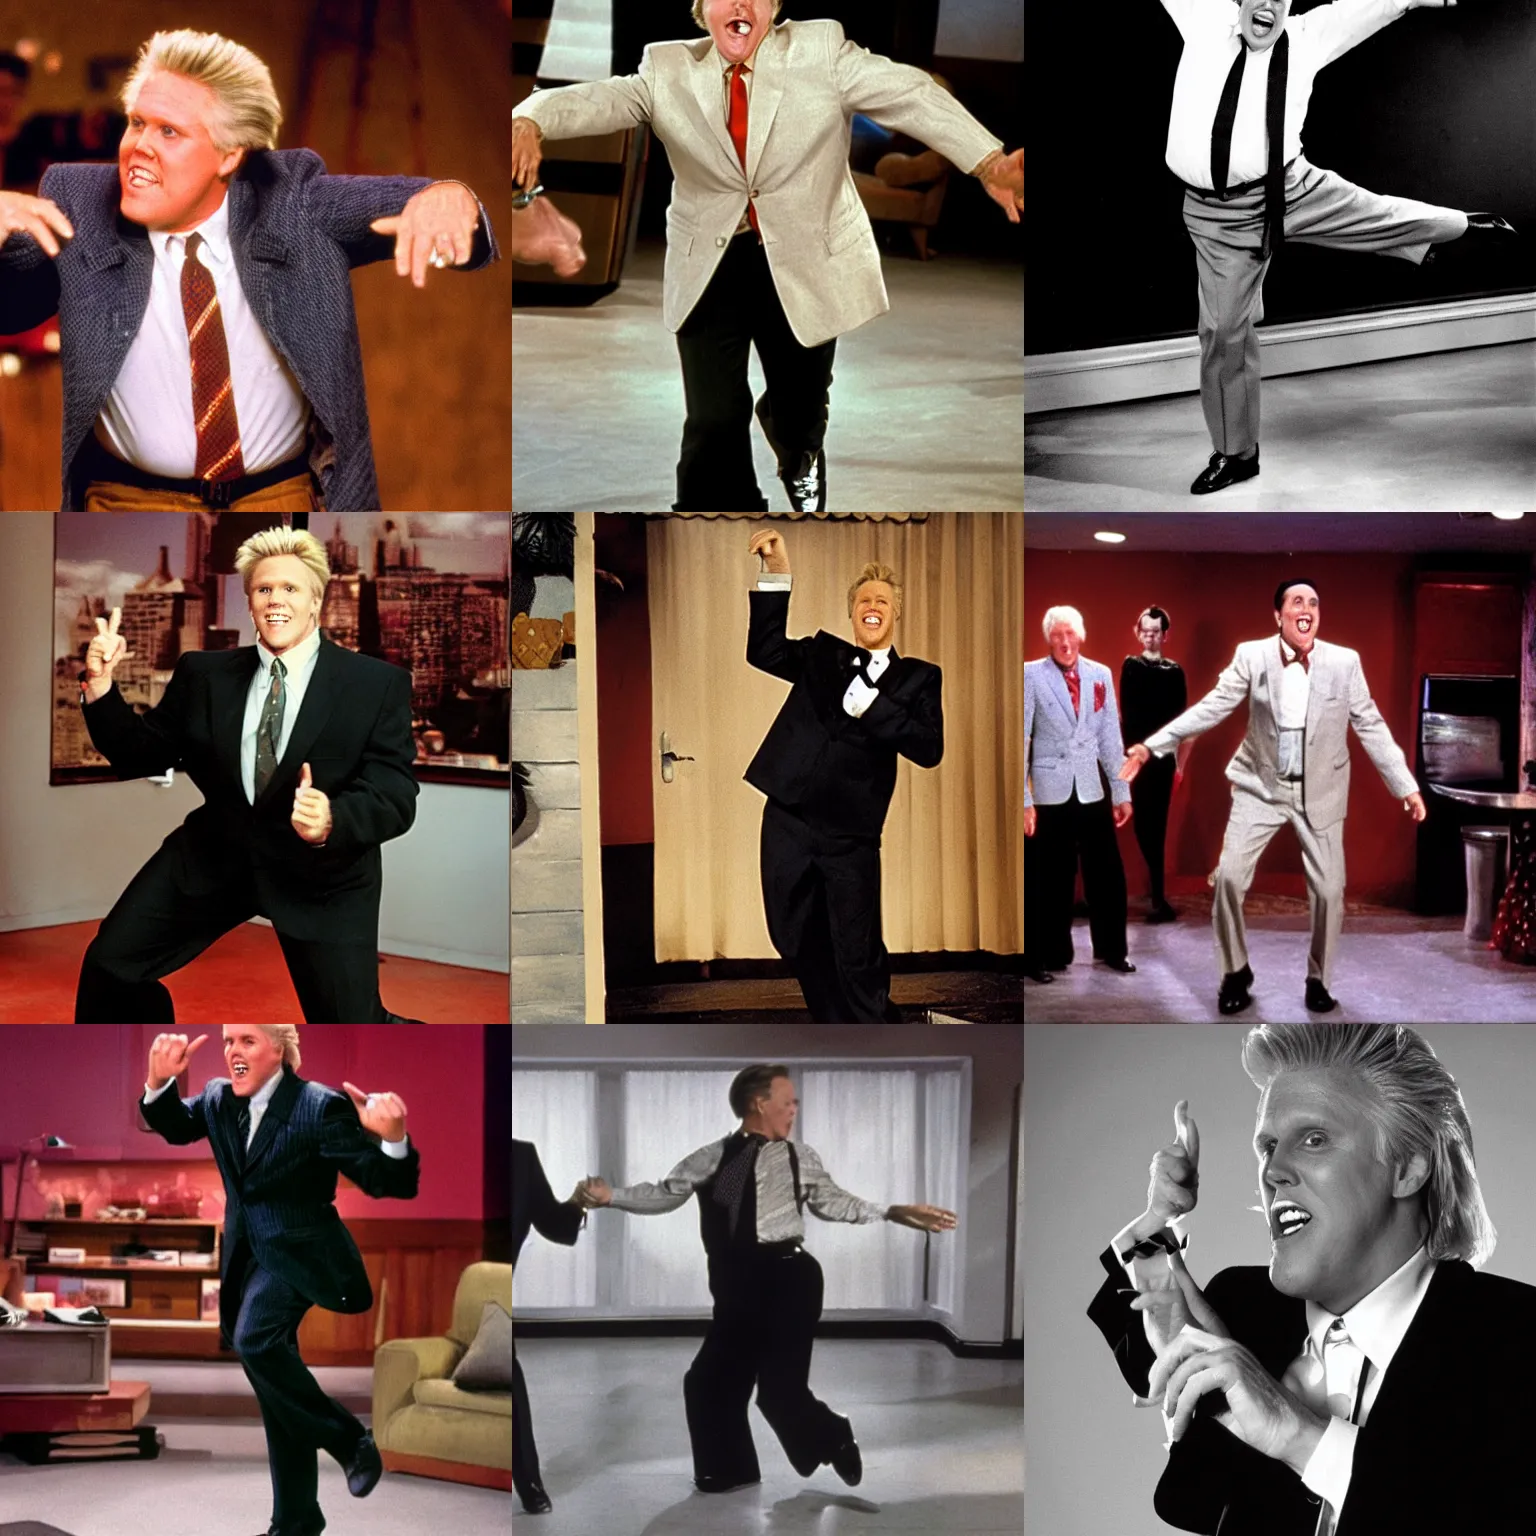 Prompt: garry busey doing the pee wee herman big shoes dance